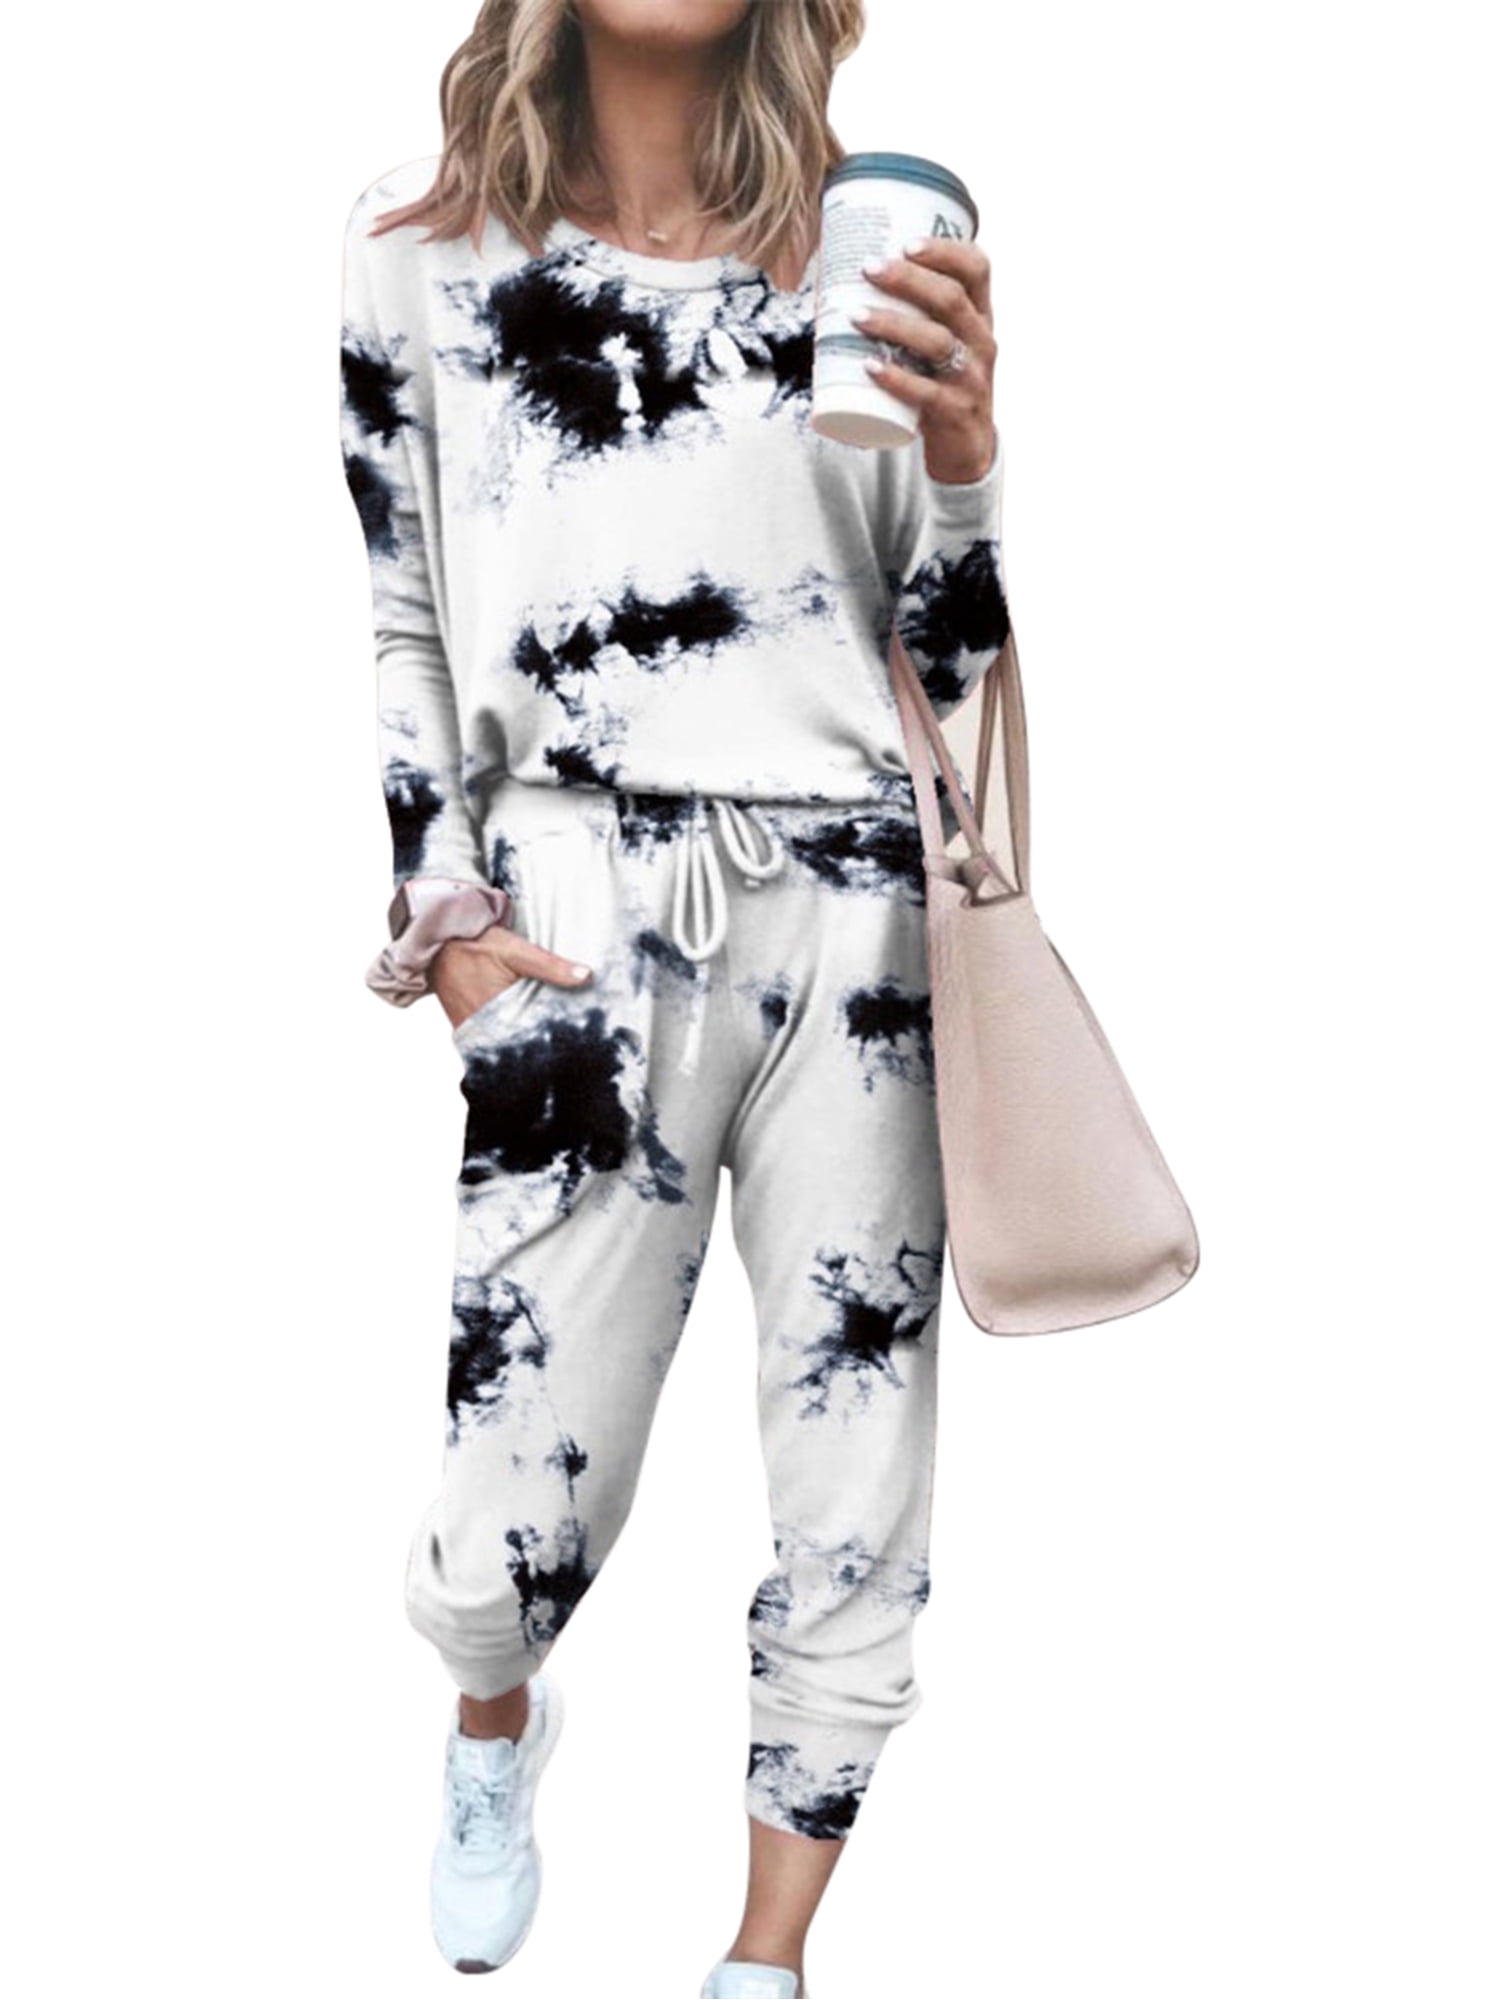 Tie Dye Sweatsuit 2 Pieces for Women Sweatshirt with Hooded Drawstring and Sweatpants Lounge Set Pajama Wear Casual Tracksuit 